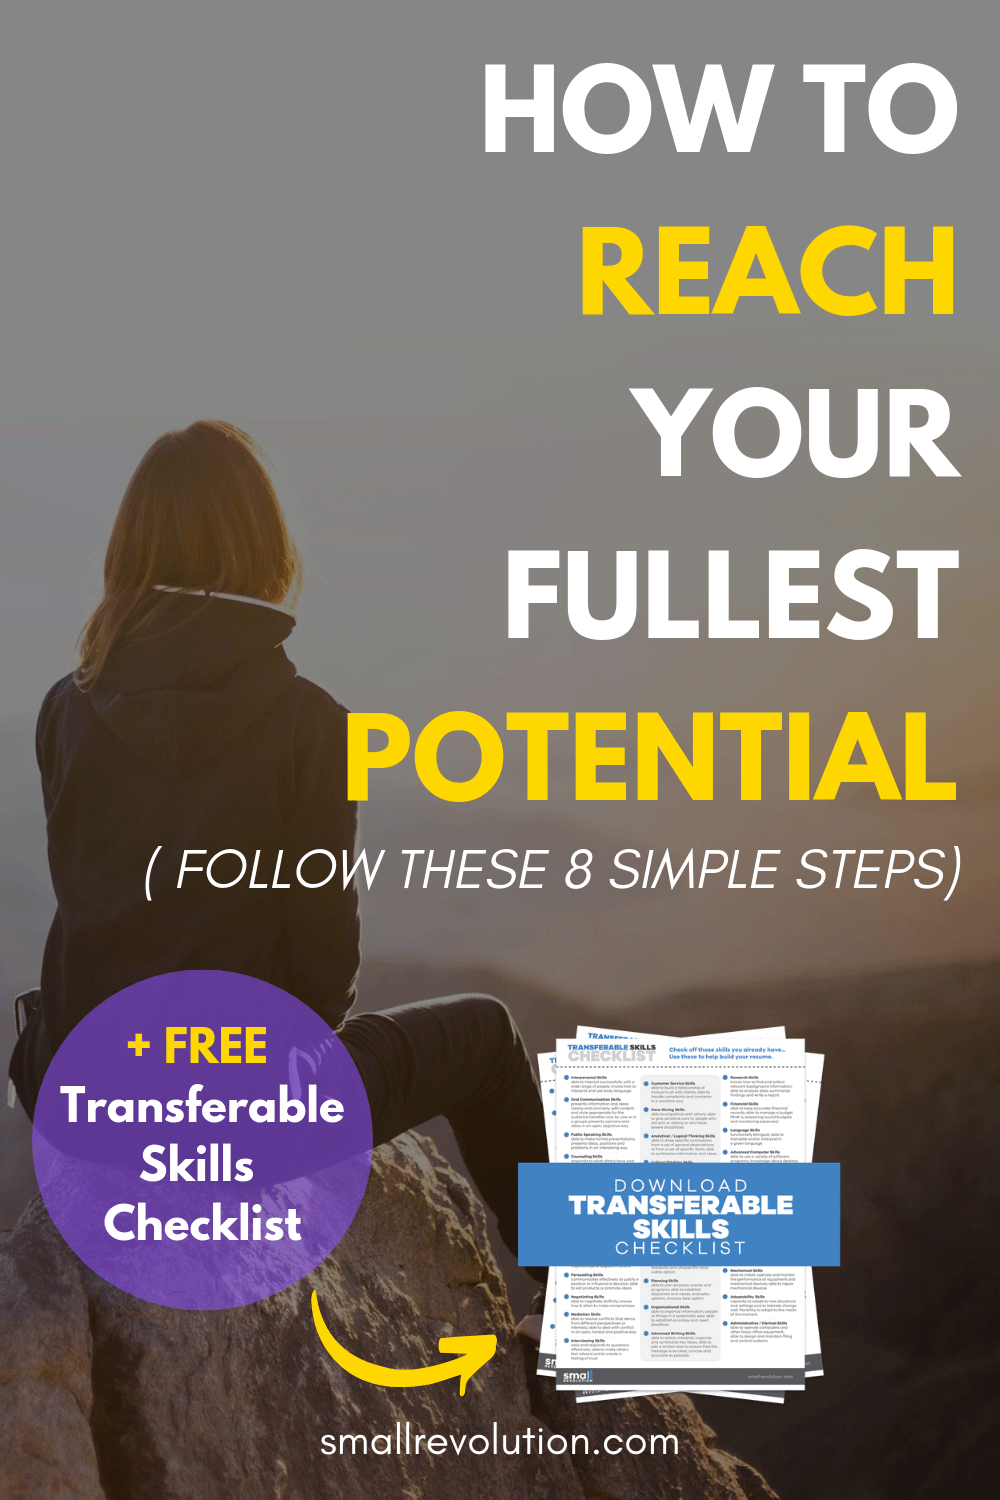 How to Reach Your Fullest Potential